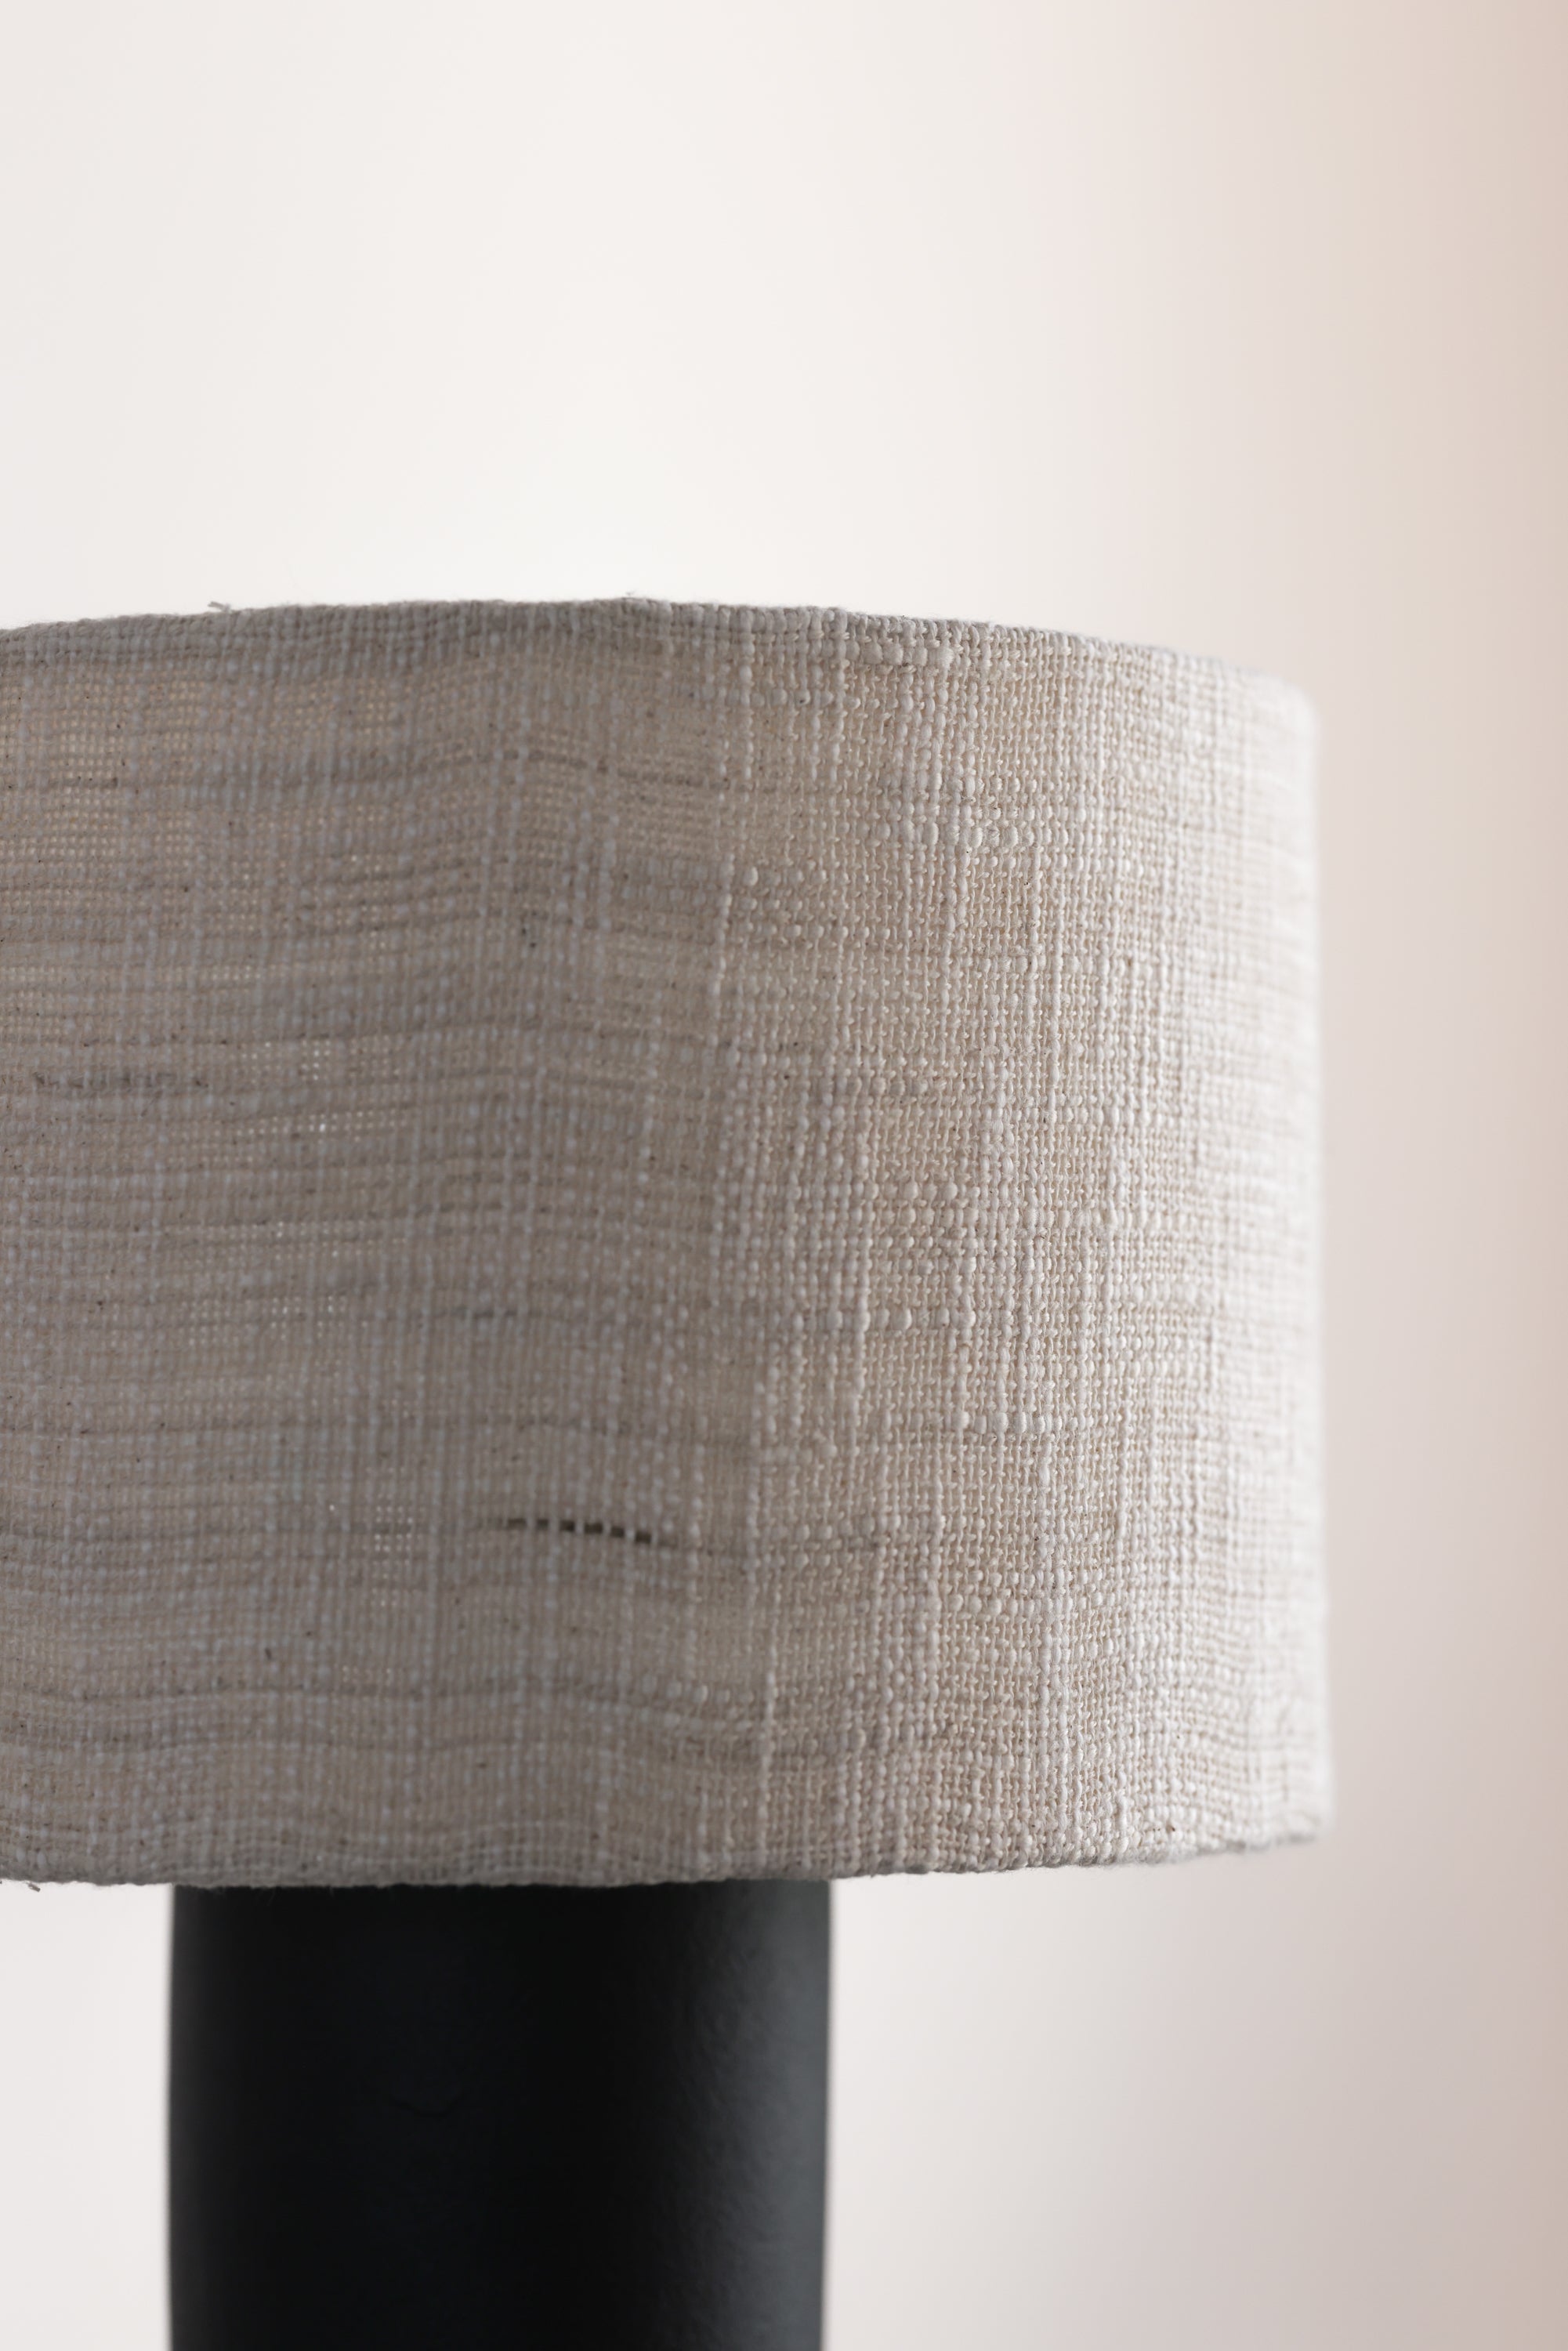 Noir table lamp with textured white shade